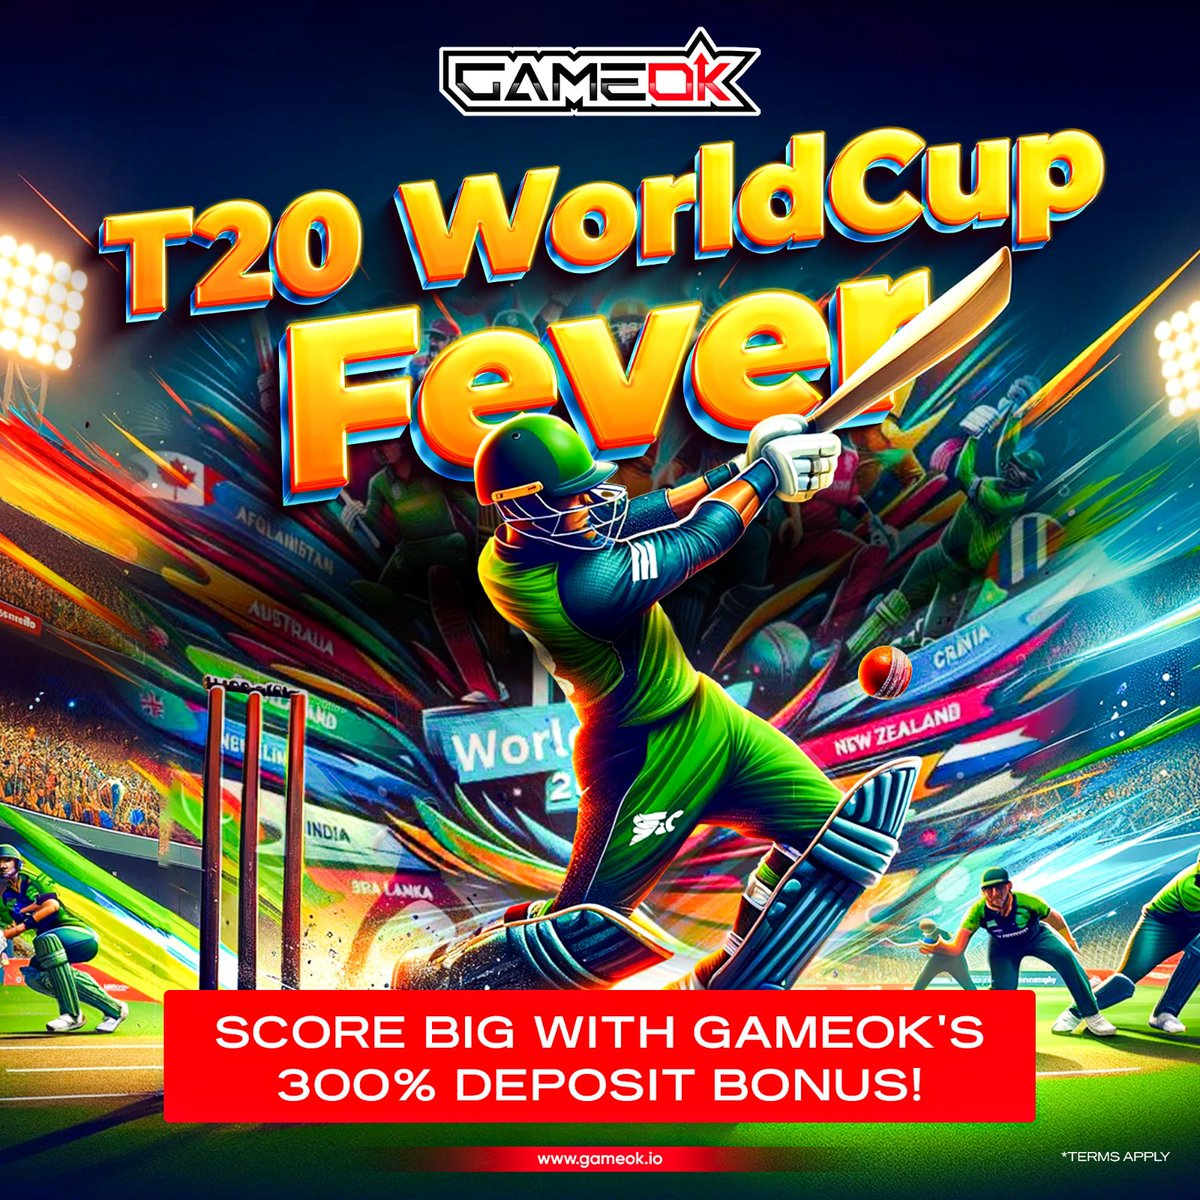 Cricket's biggest battle roars soon,
Get your T20 World Cup fever on with gameOK's MASSIVE 300% Deposit Bonus! 🏏

Earn BIG with a minimum turnover, only on GAMEOK! 🏁 

#gameok #WorldCup #t20worldcup #iccmenscricketworldcup2024 #icc #cricketfans #cricketlover #BettingOnline